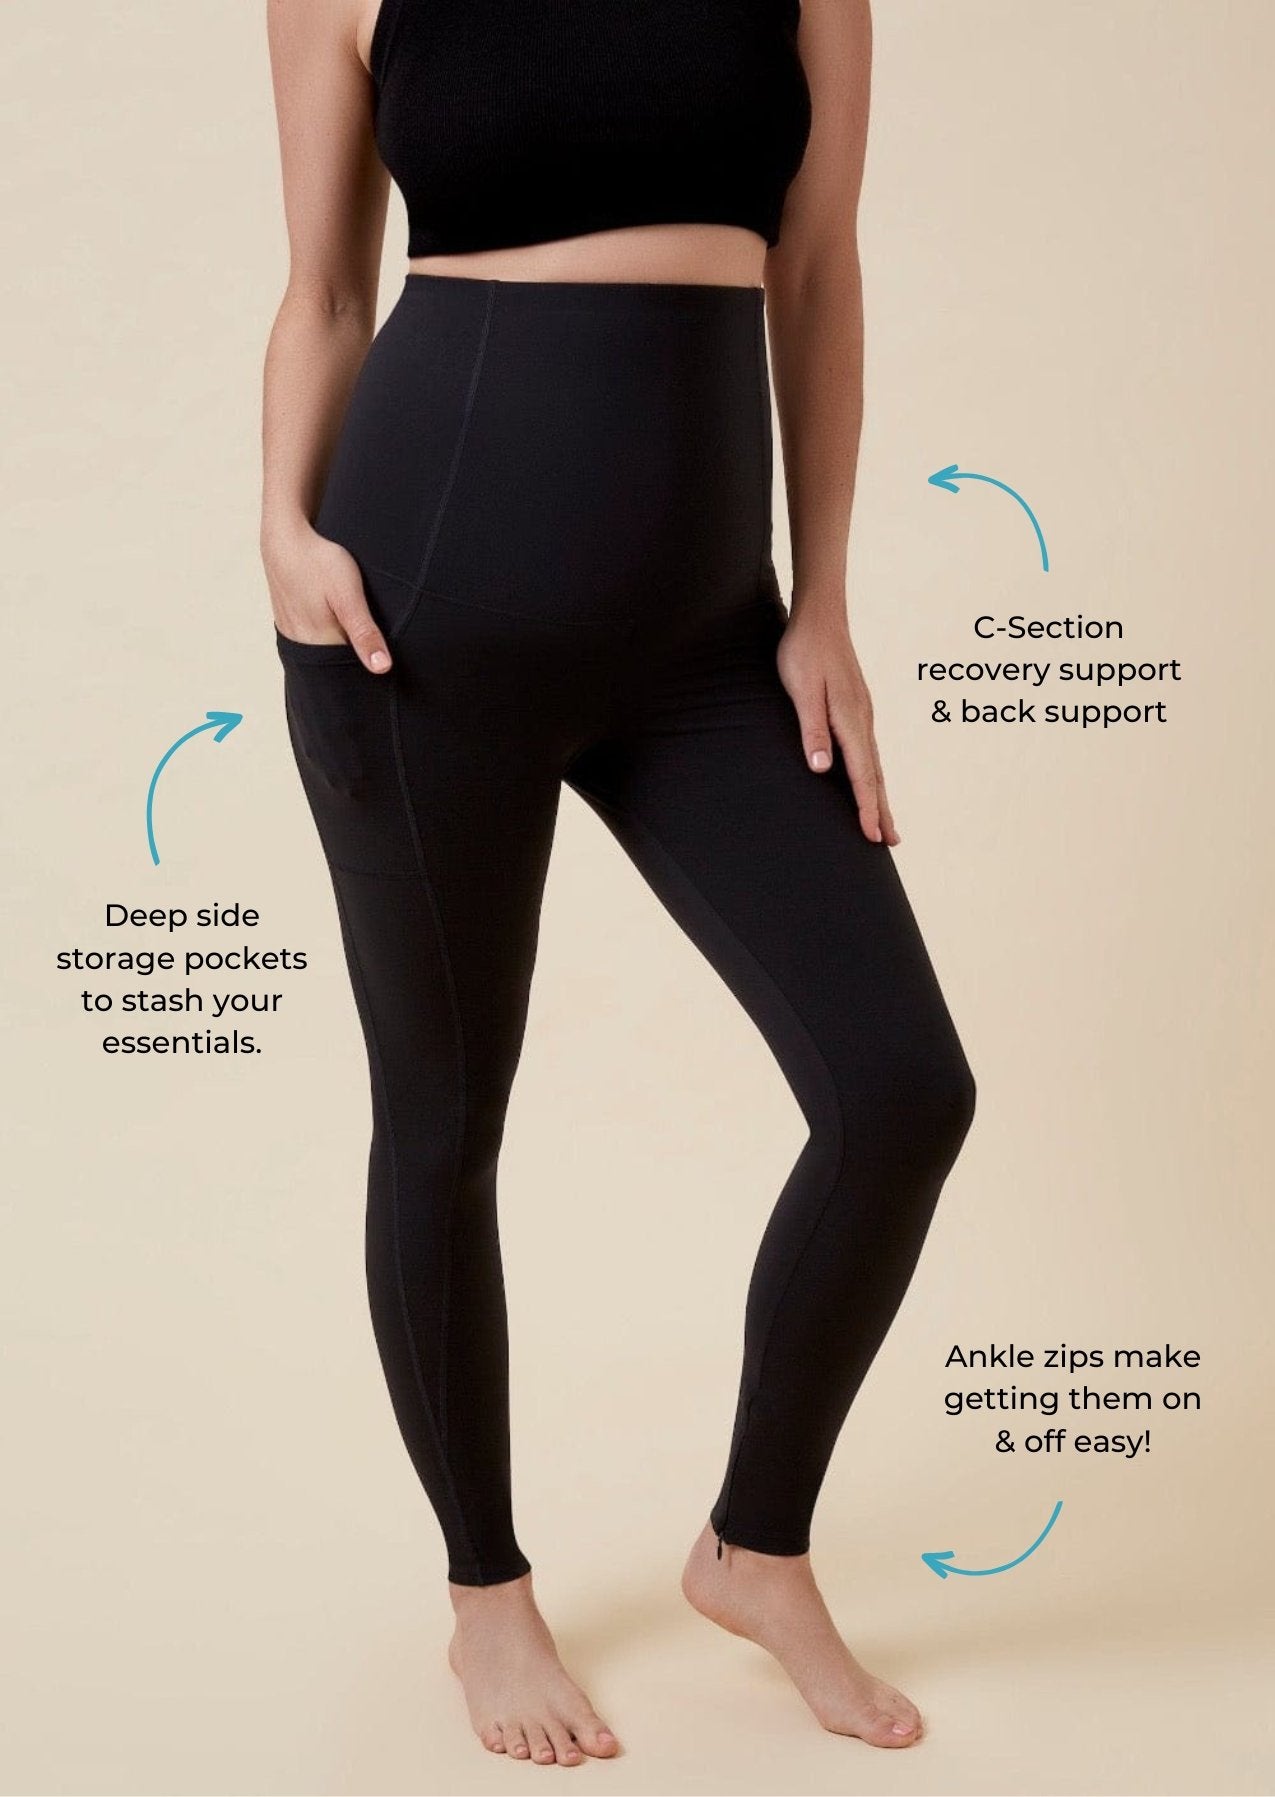  Ingrid & Isabel Active Postpartum Legging w/Compression, for  Recovery